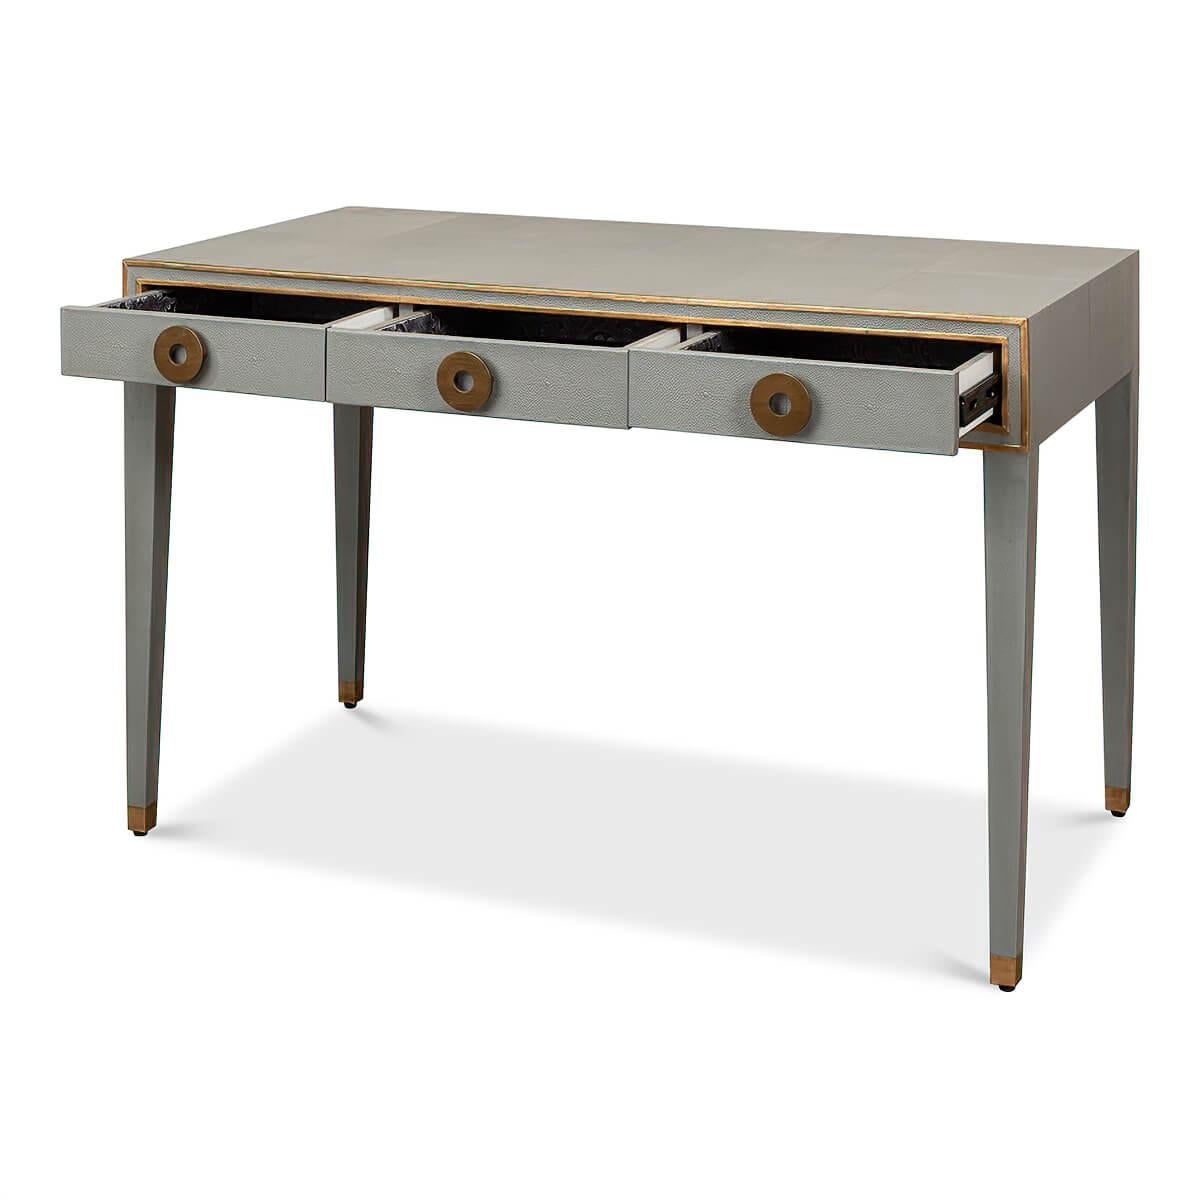 A French Art Deco style shagreen embossed leather desk in a light grey. With gilded highlight trim, three frieze drawers with modern round pulls, and raised on square tapered legs.

Dimensions: 49